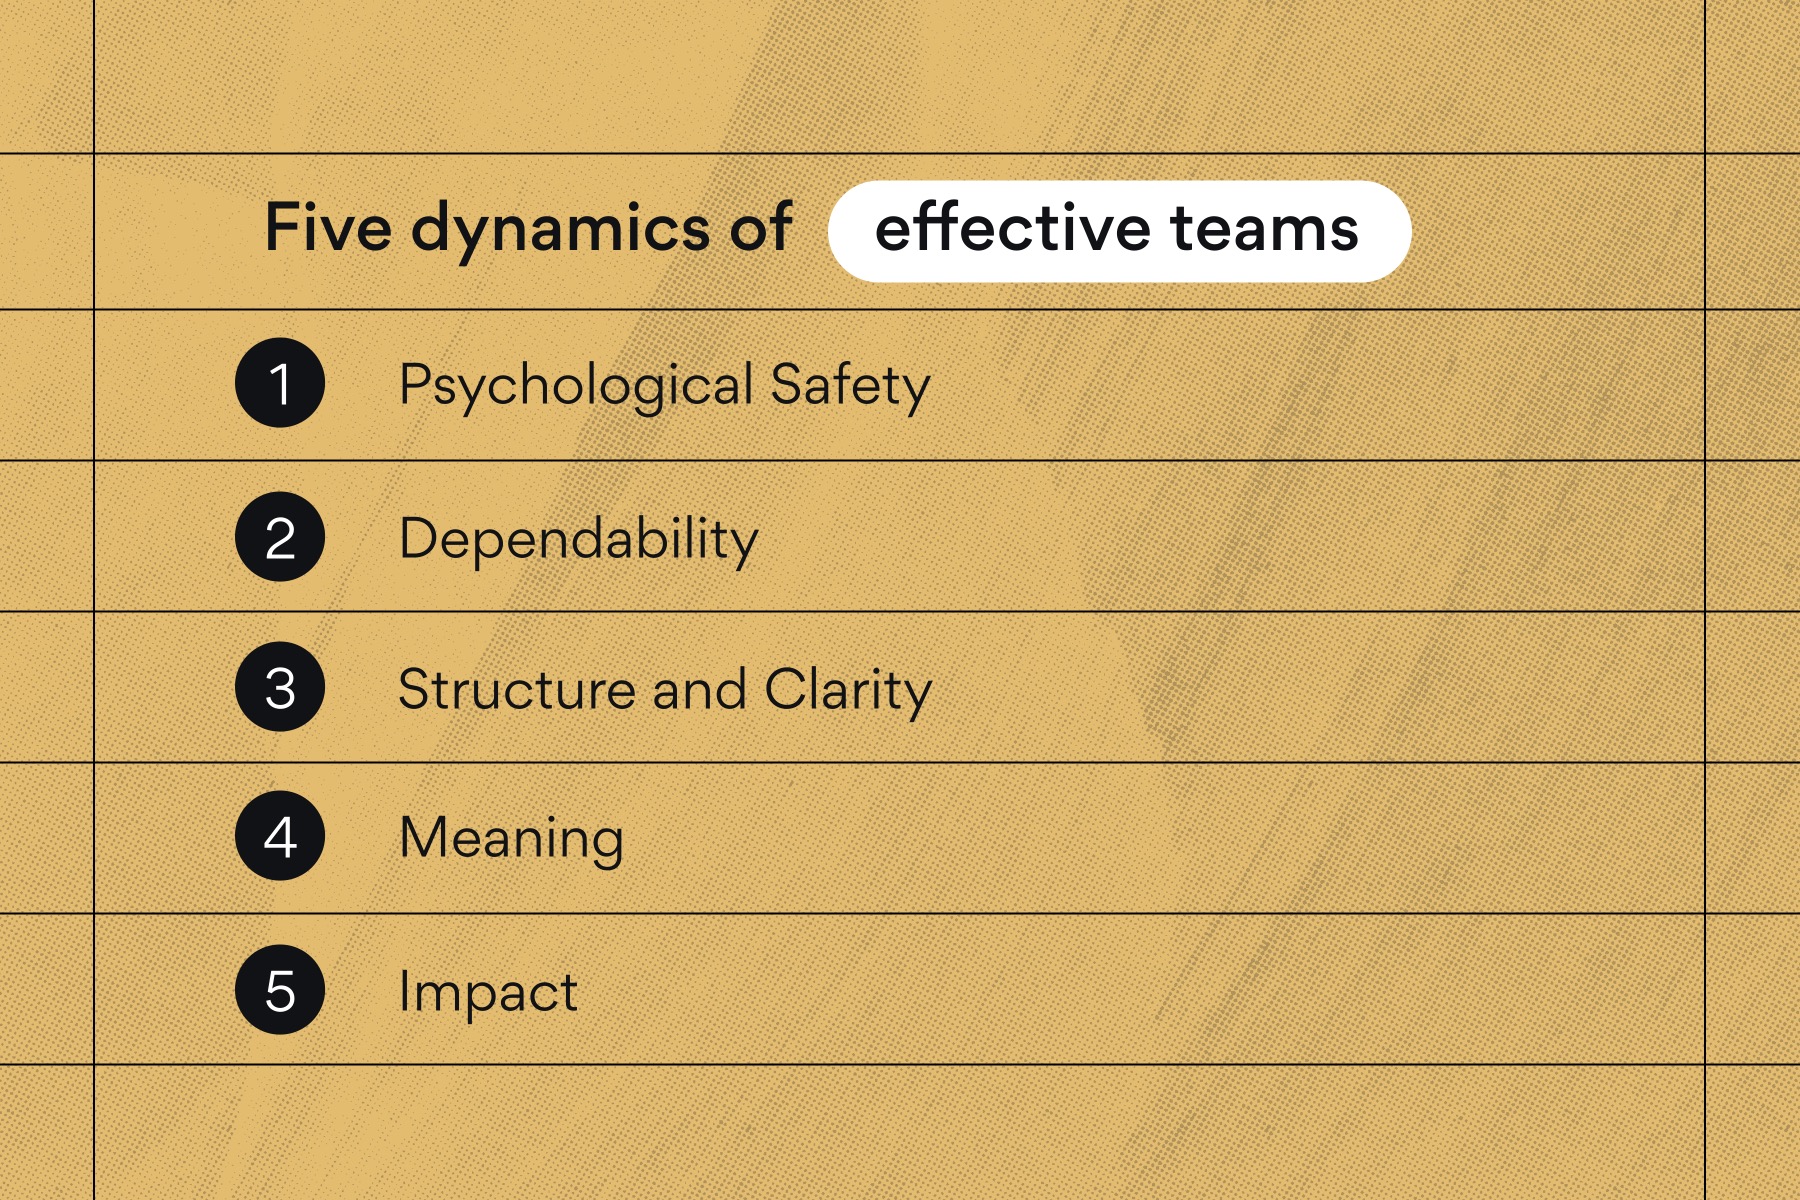 Illustration showing the five dynamics of effective teams: psychological safety, dependability, structure and clarity, meaning, and impact